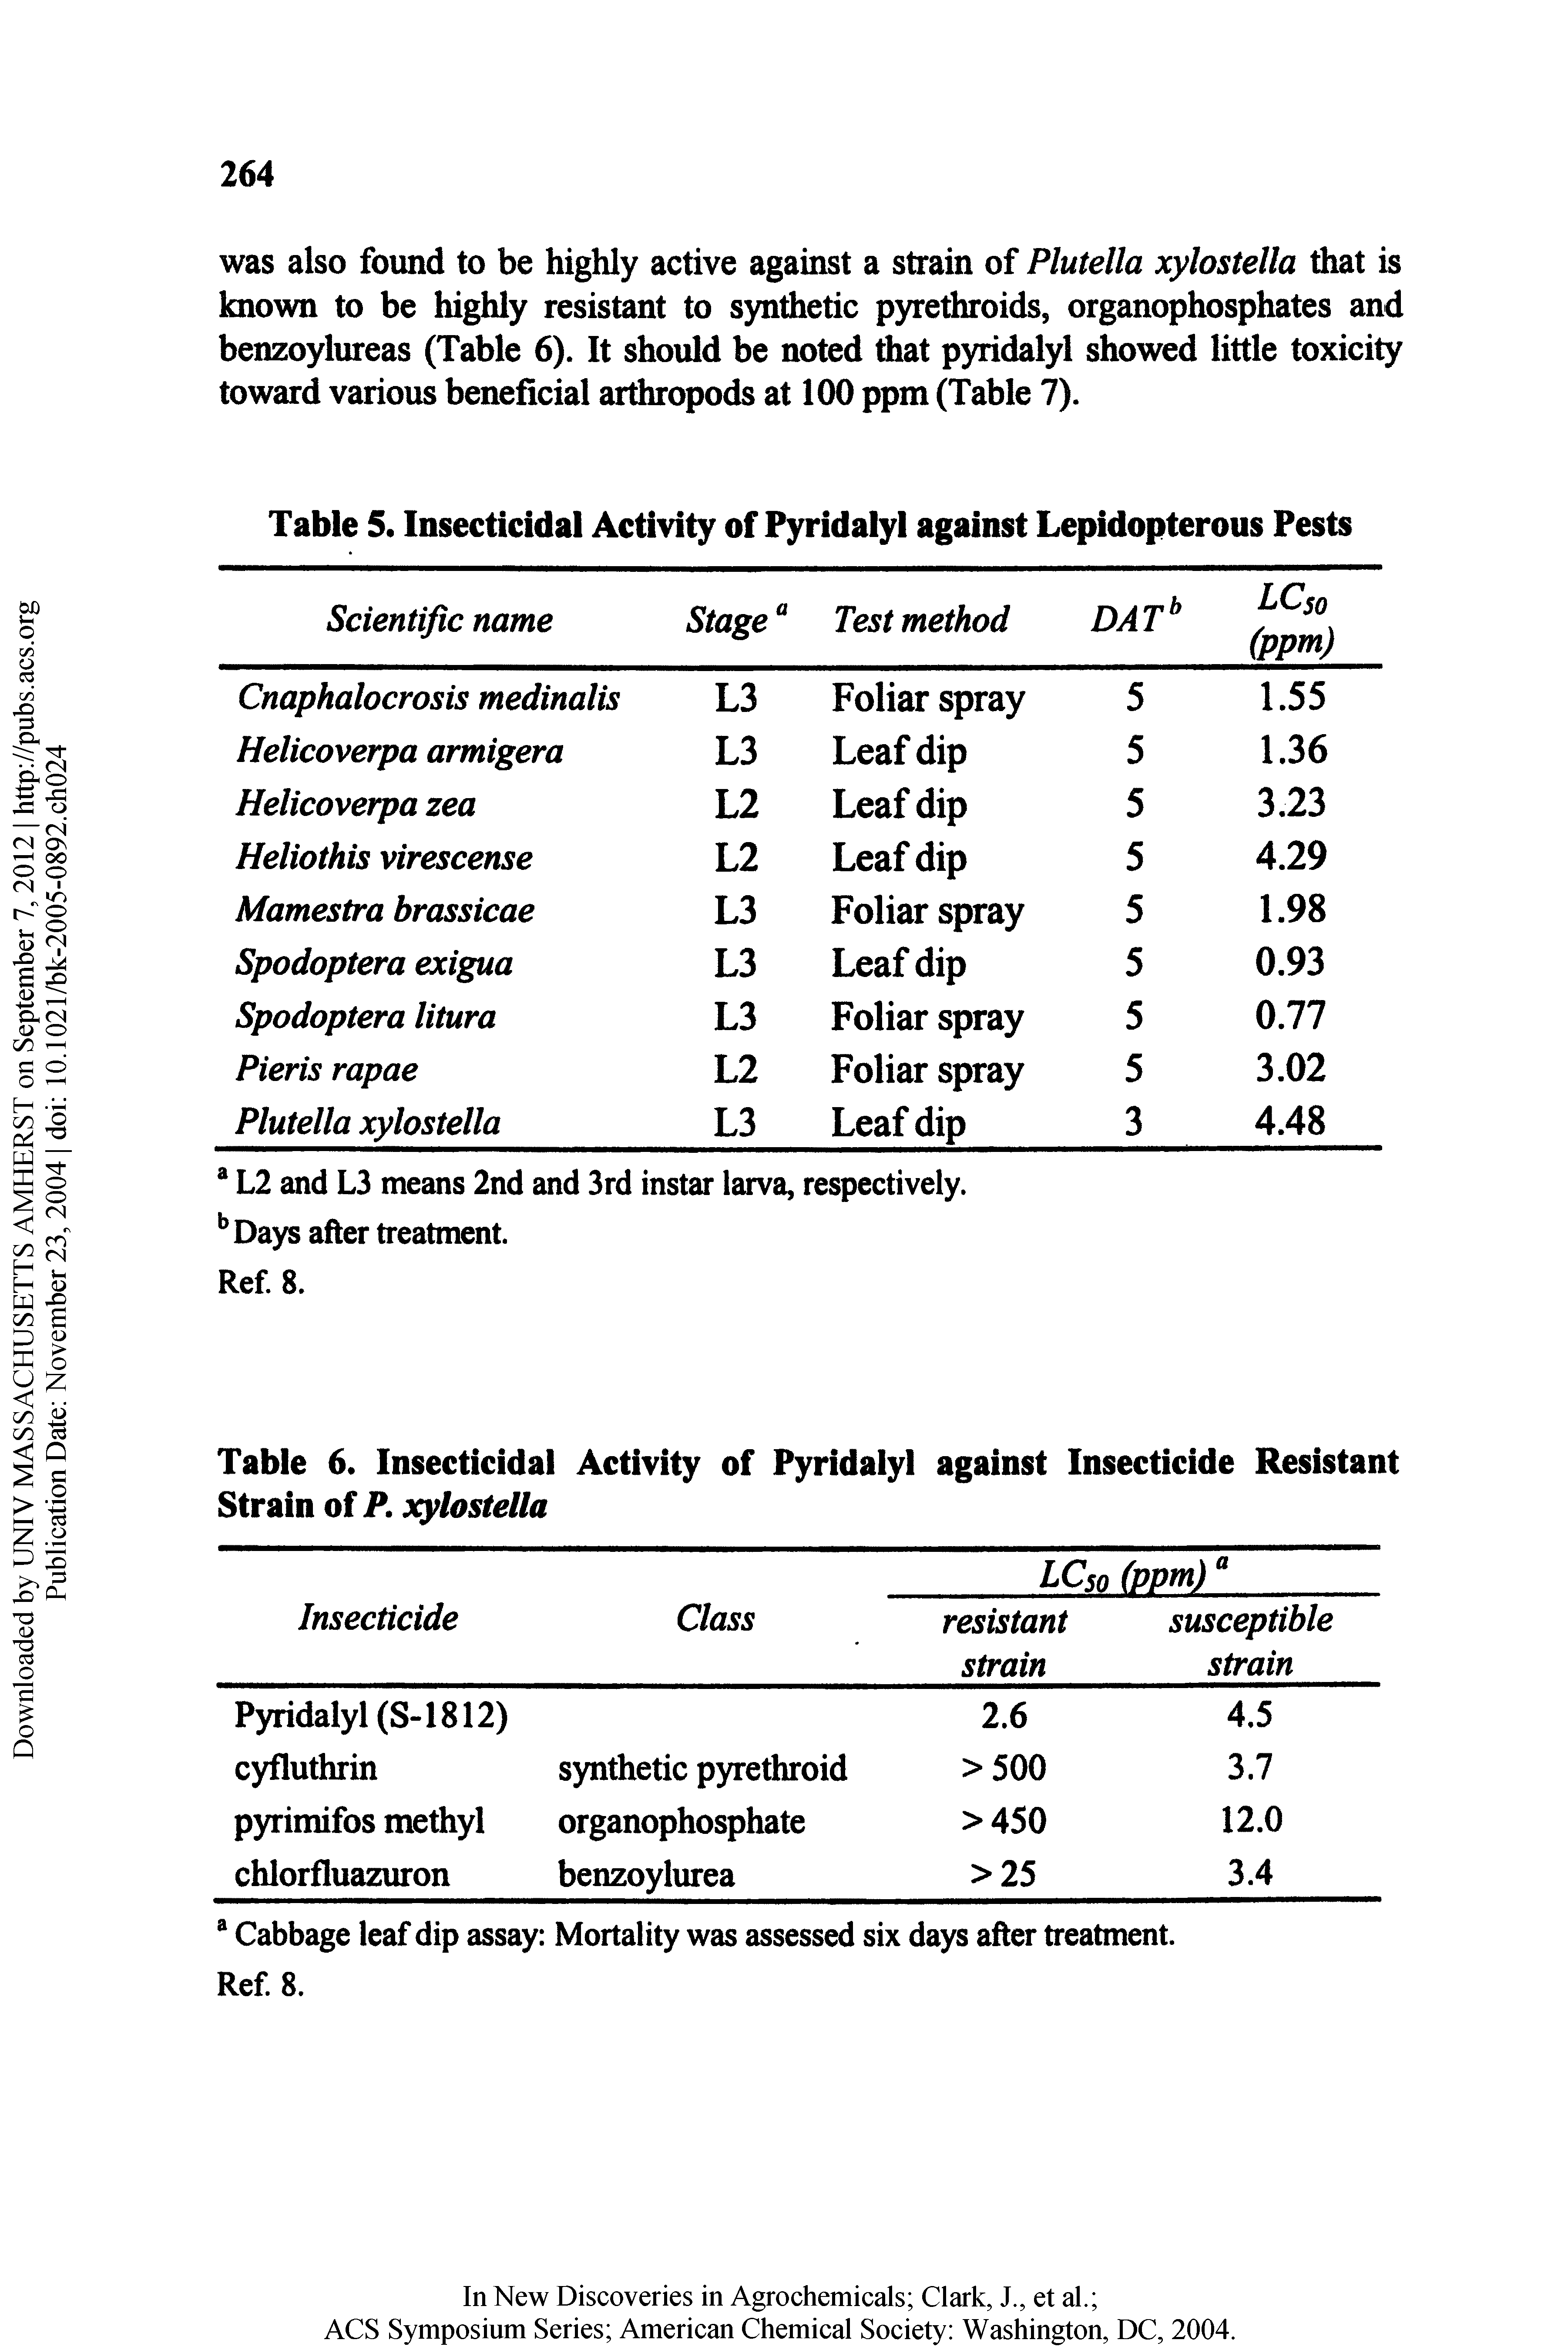 Table 5. Insecticidal Activity of Pyridalyl against Lepidopterous Pests...